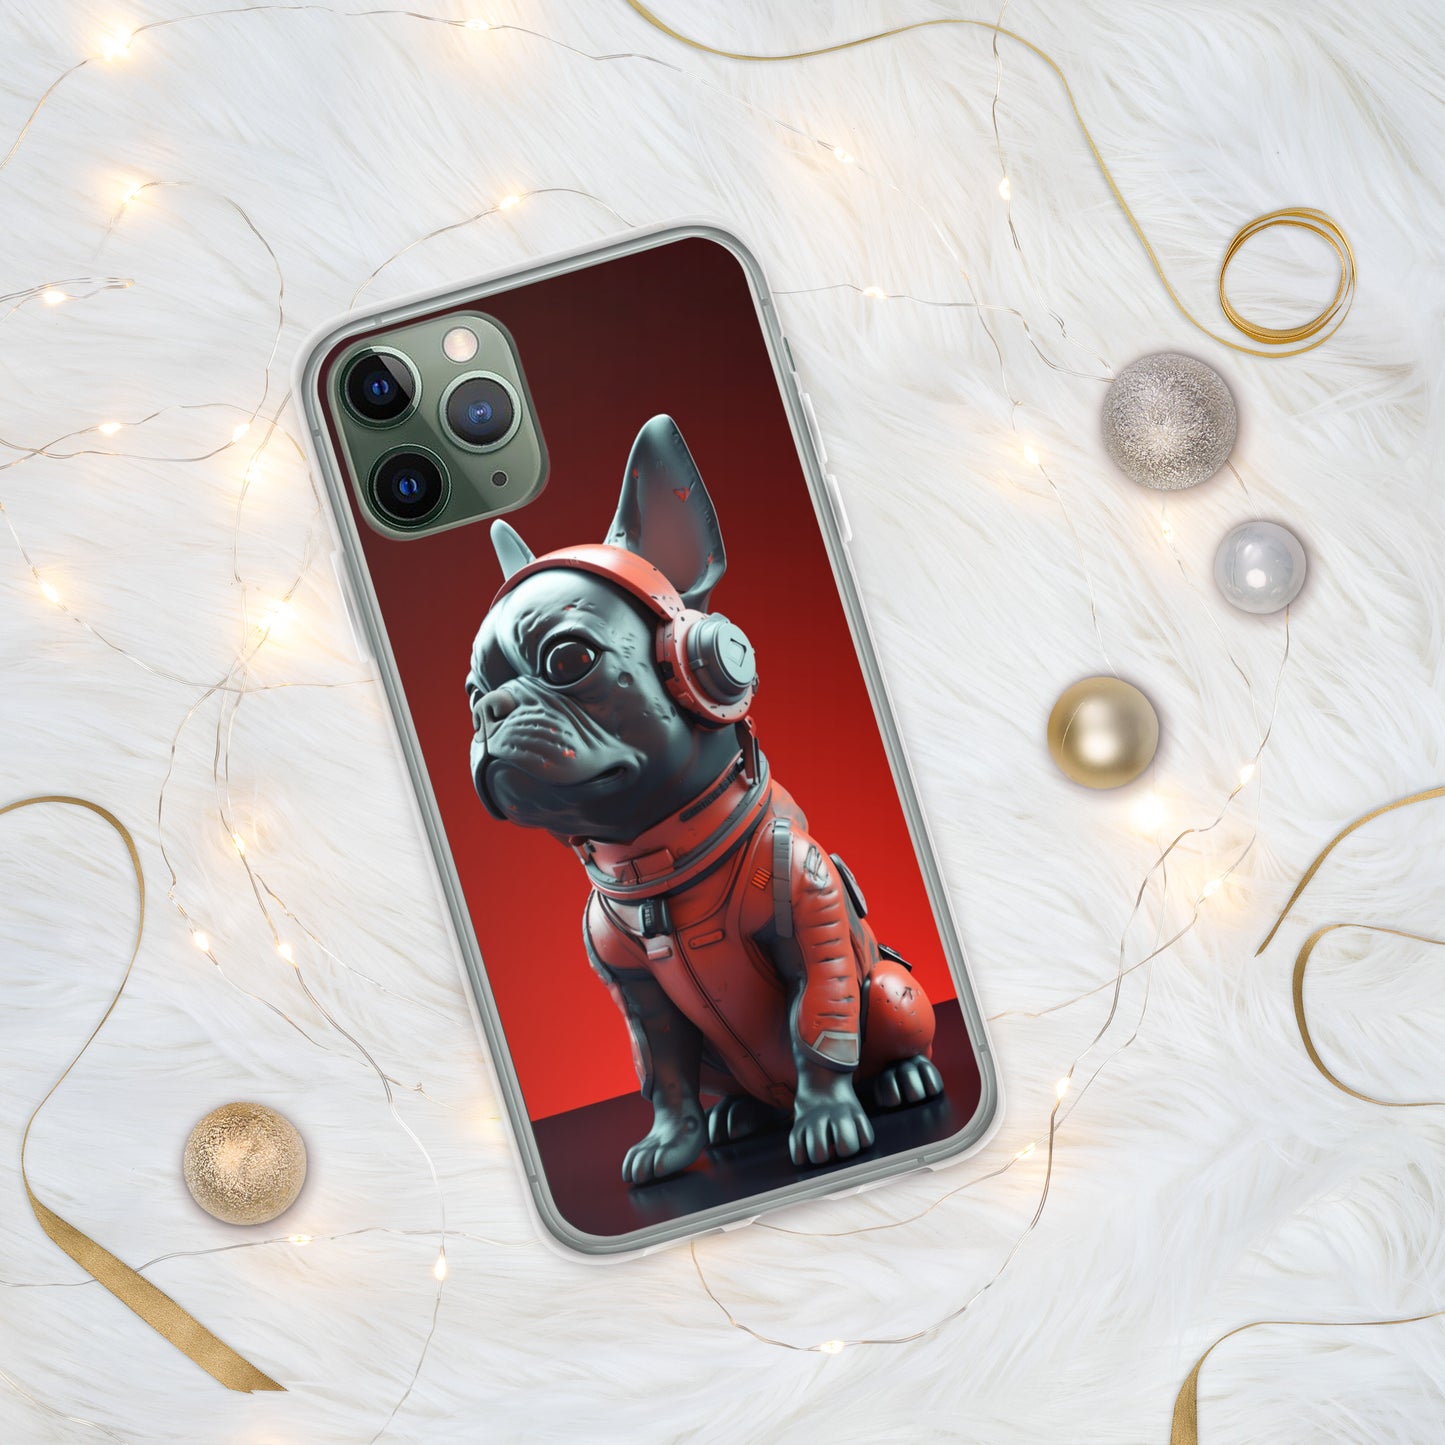 Durable Elegance iPhone Case - Exquisite Frenchie Hybrid Design for Chic Protection